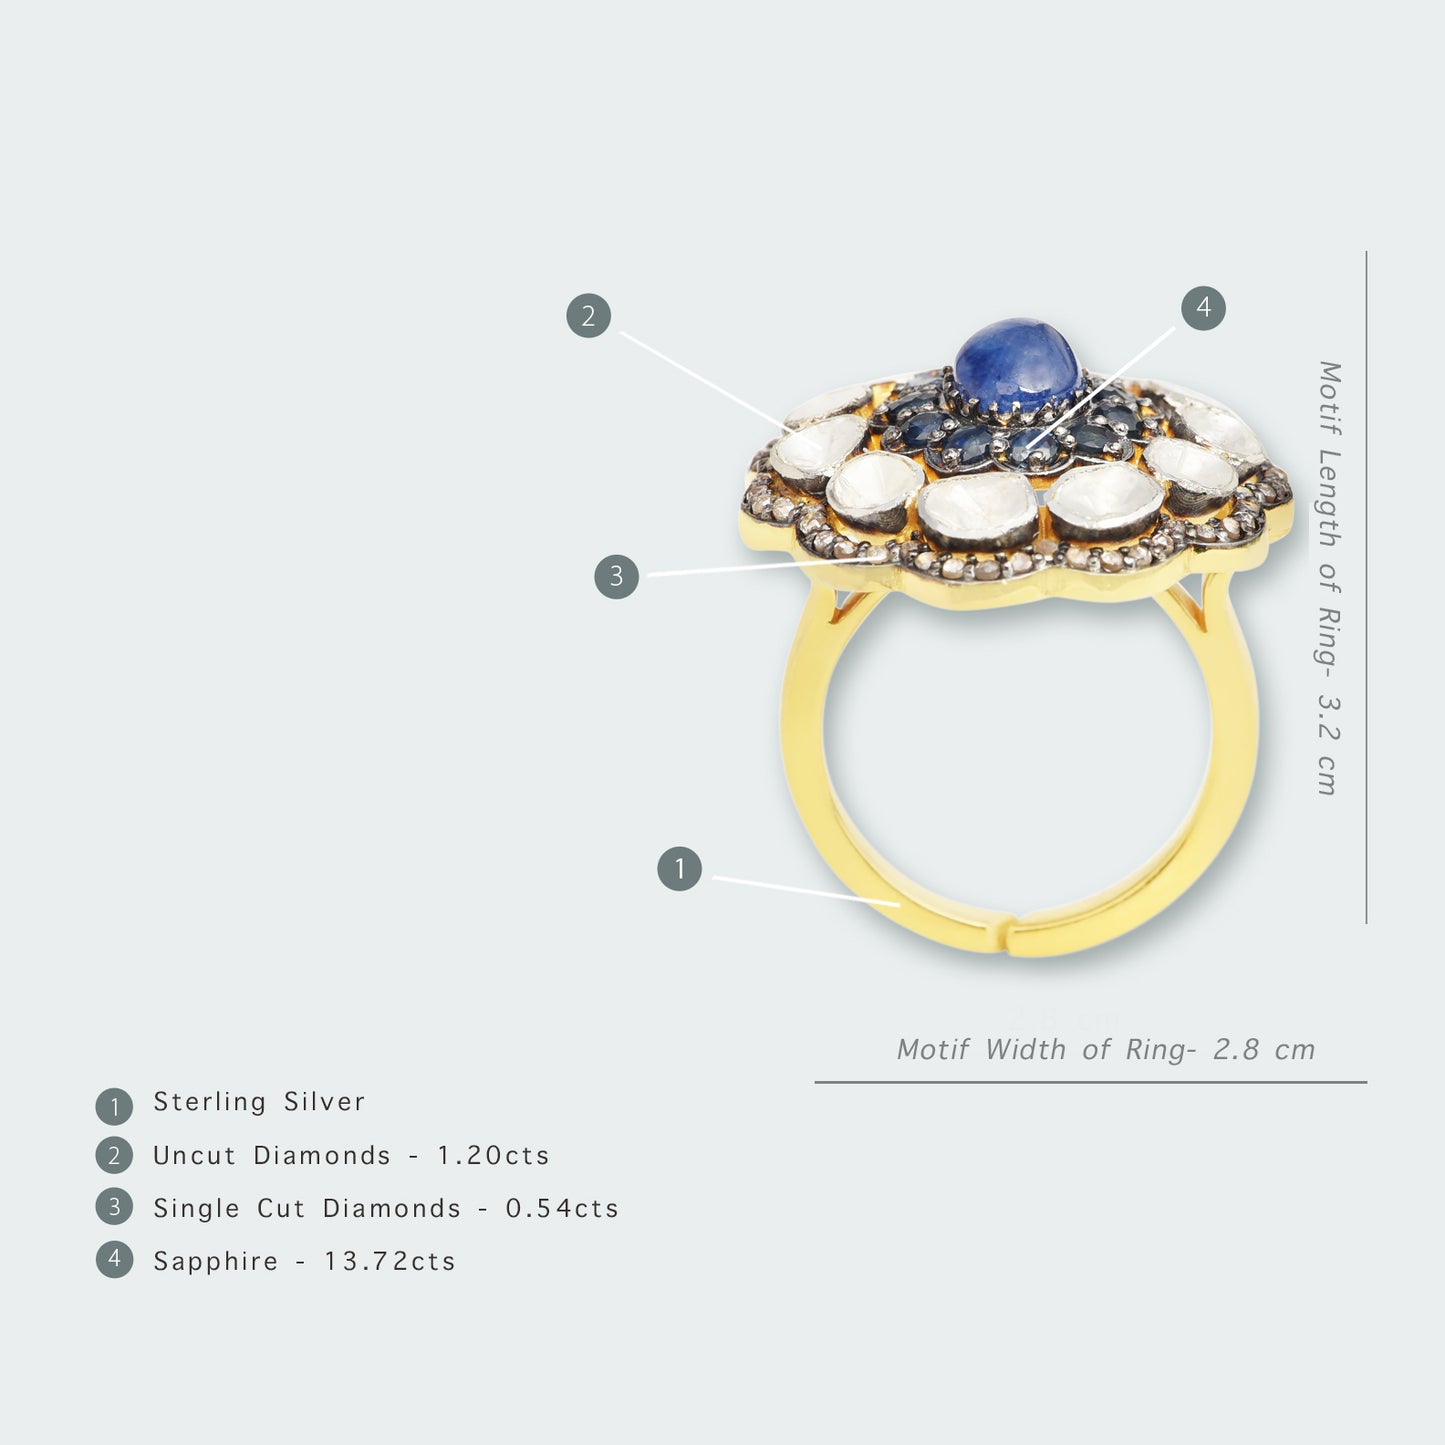 Astrales Flower Sapphire And Uncut Diamond Ring